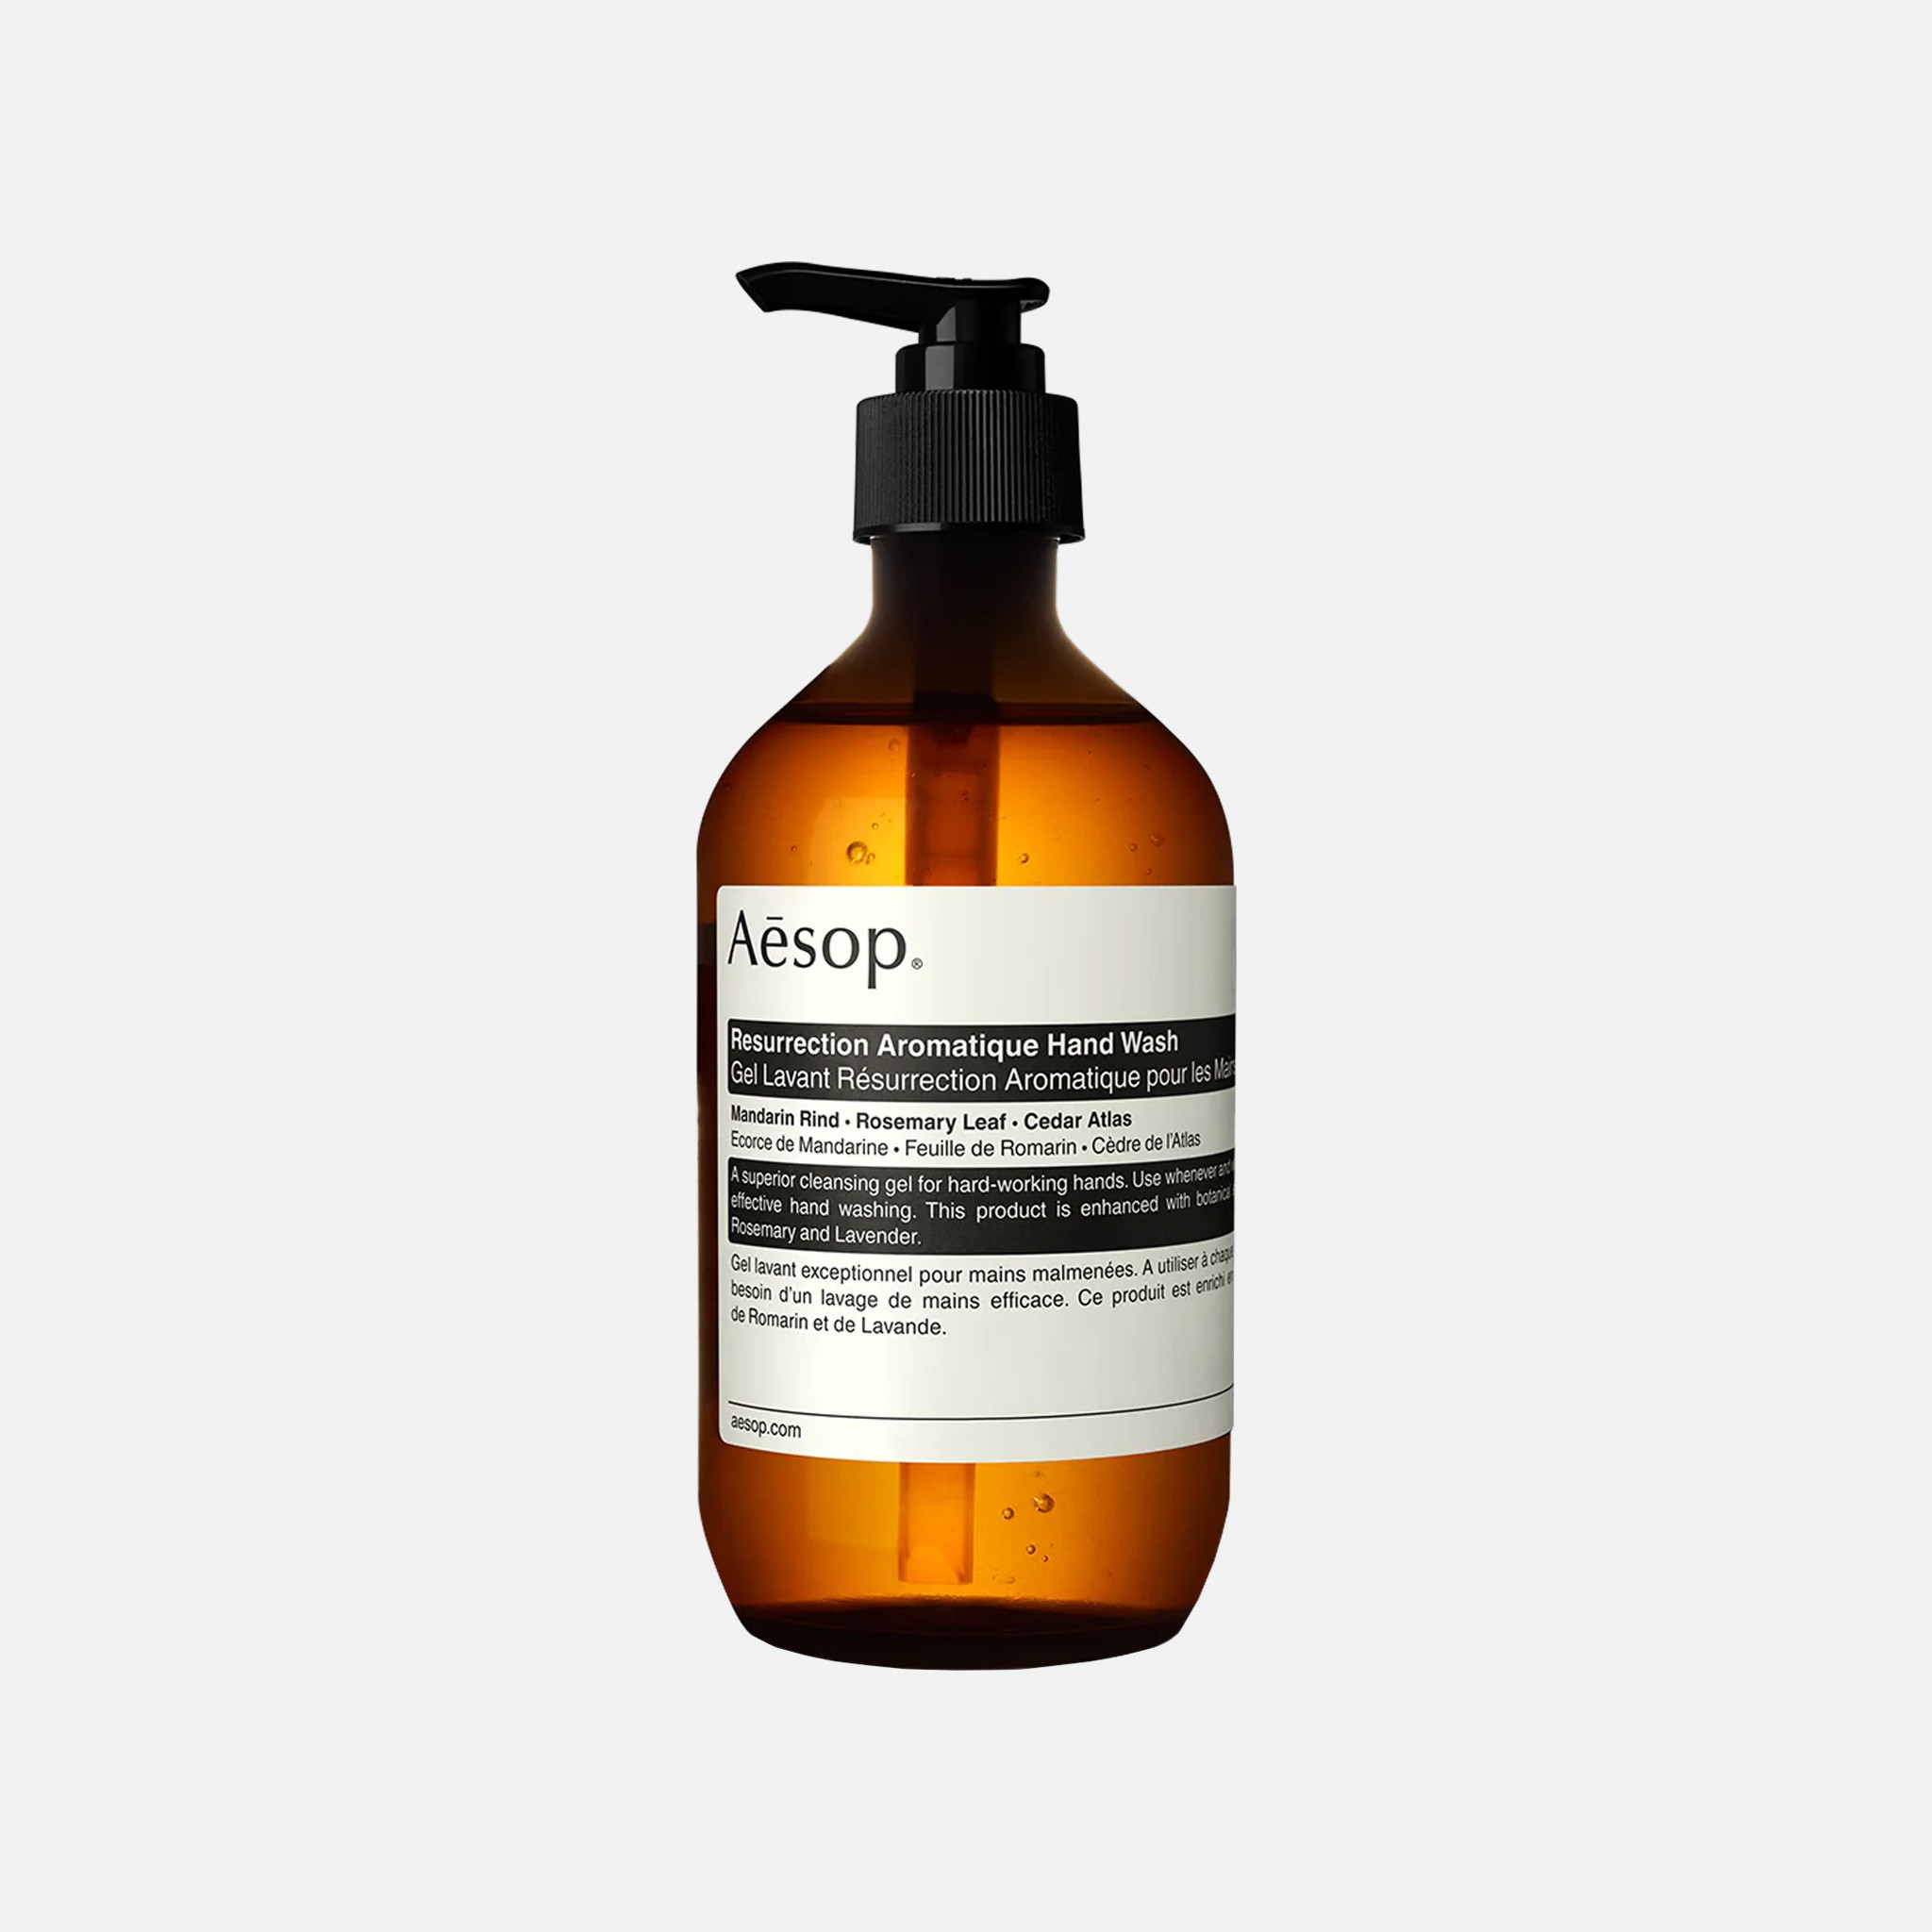 The image of an Aesop Resurrection Aromatique Hand Wash product